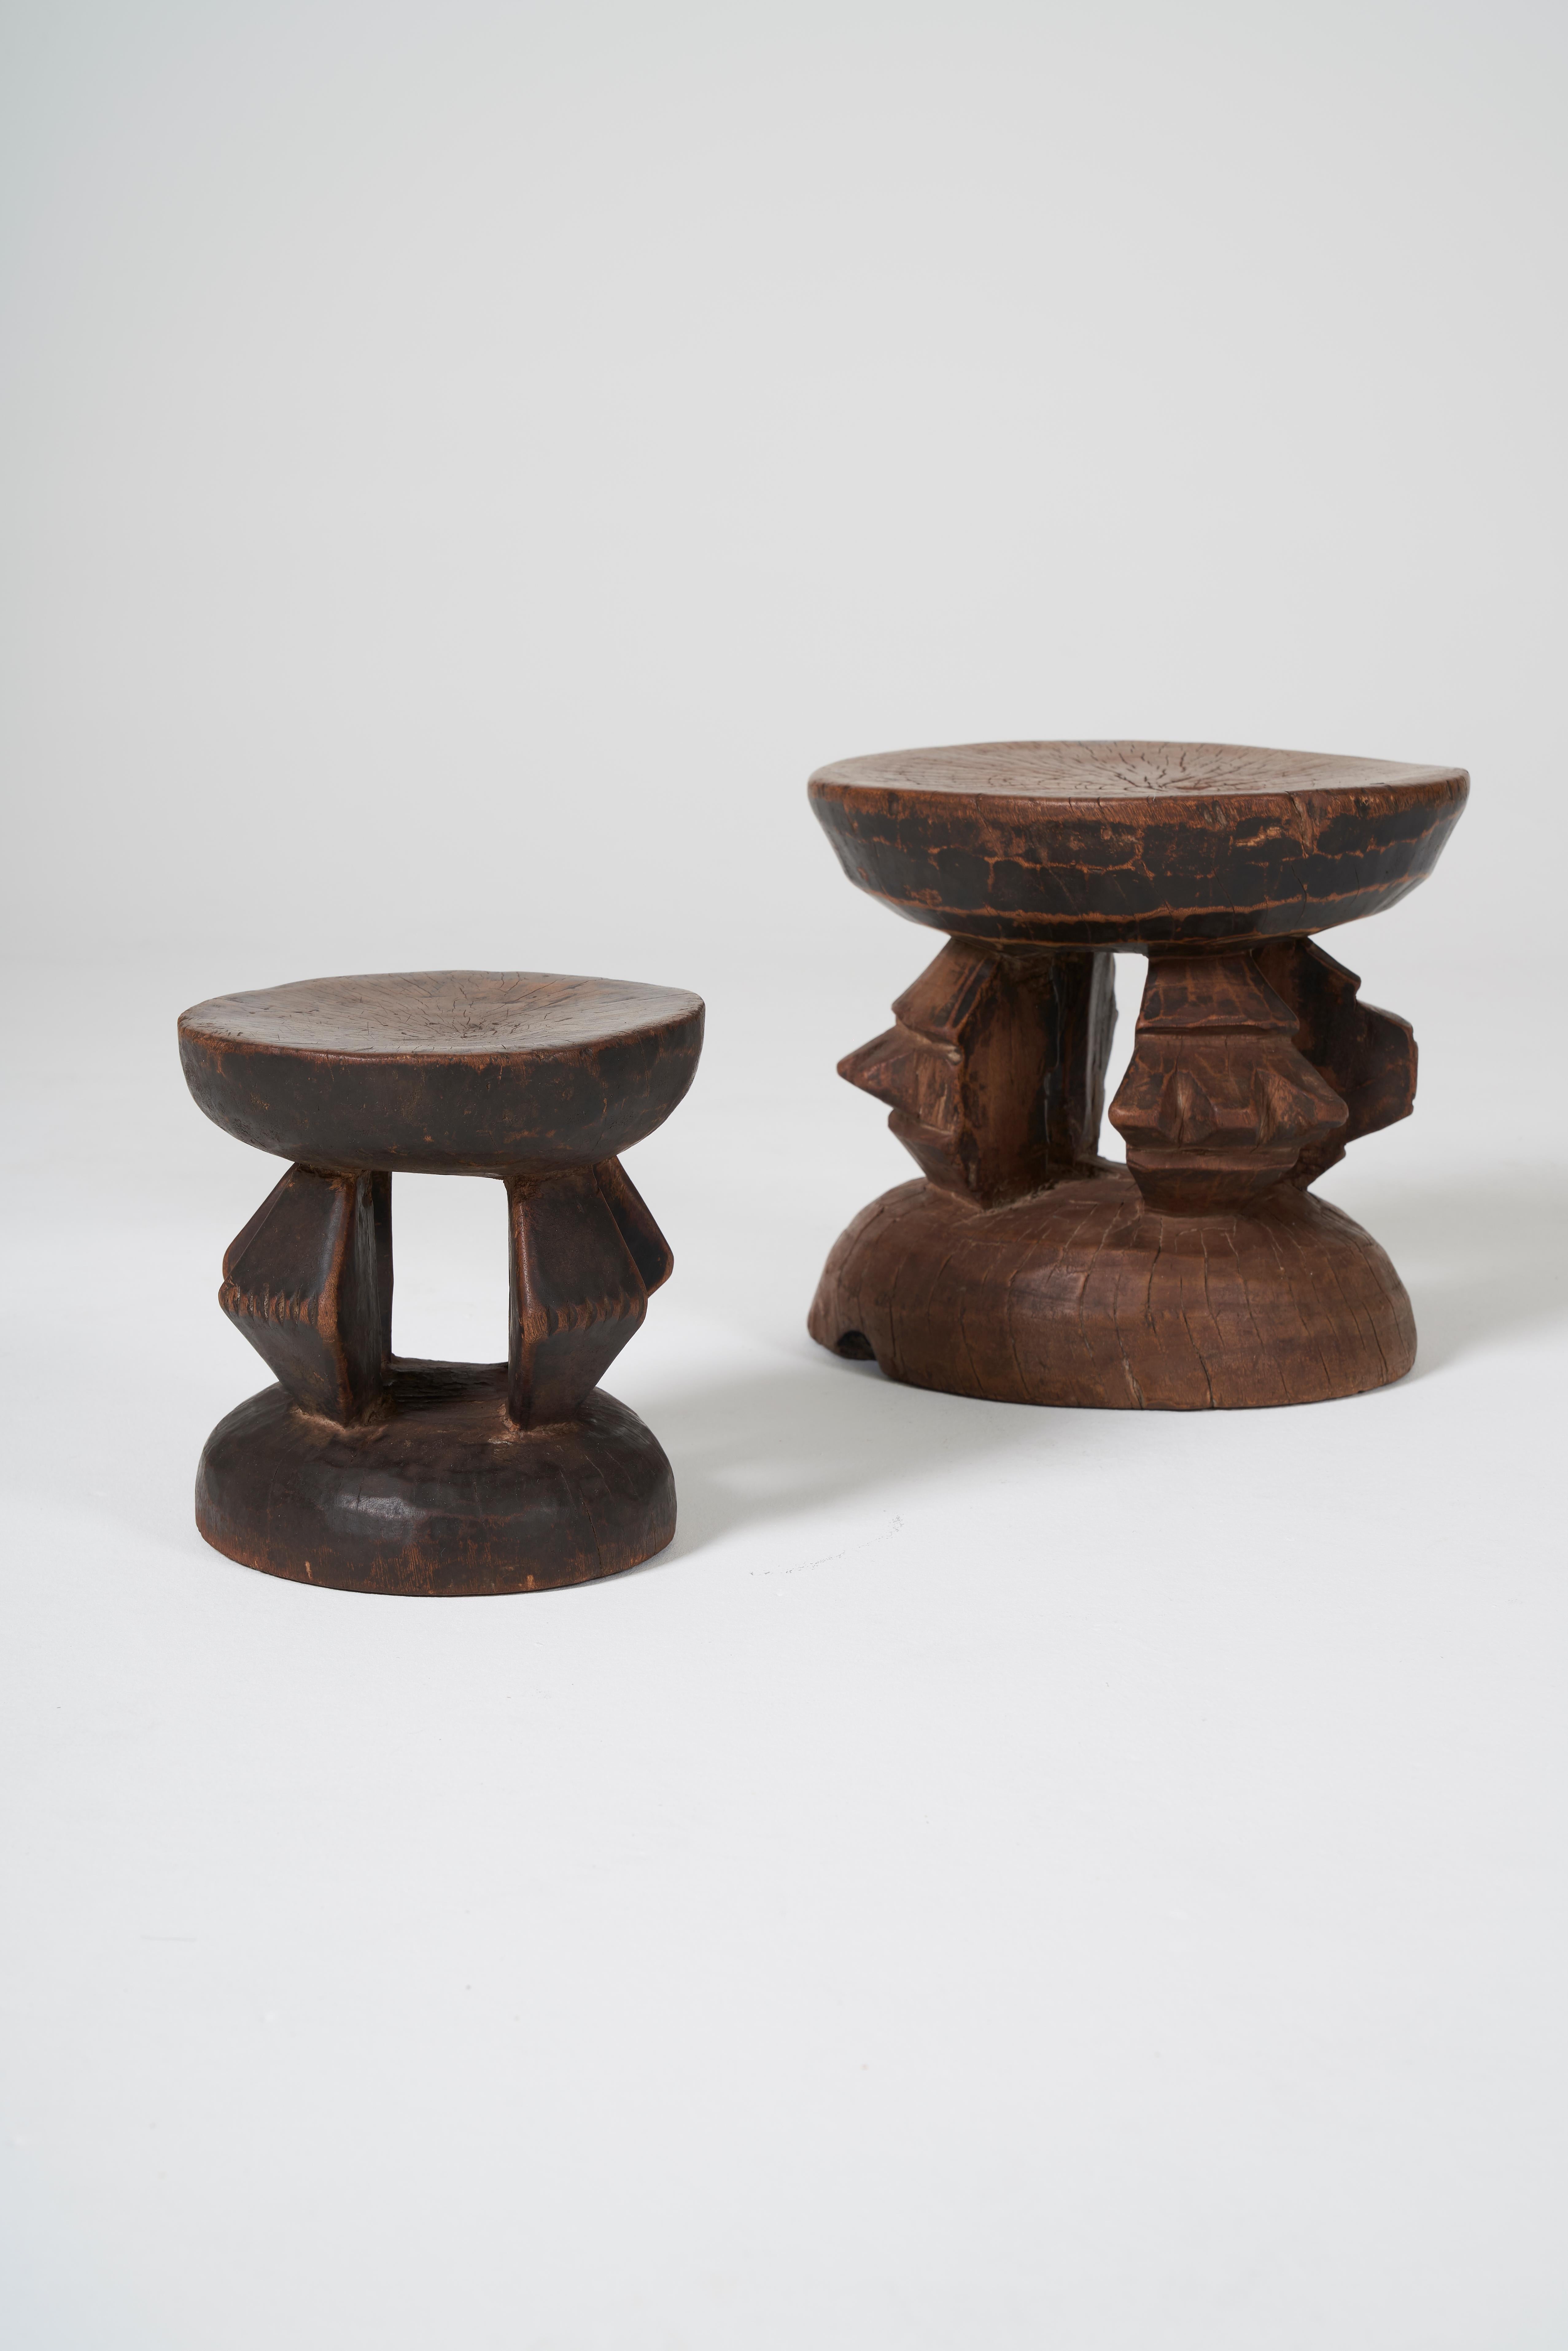 Pair of Dogon monoxyl stools from Mali, early 20th century. These stools, like family heirlooms in Western cultures, become more valuable in Africa as they age. With a beautiful patina, these stools have been used and bear the marks of their age.